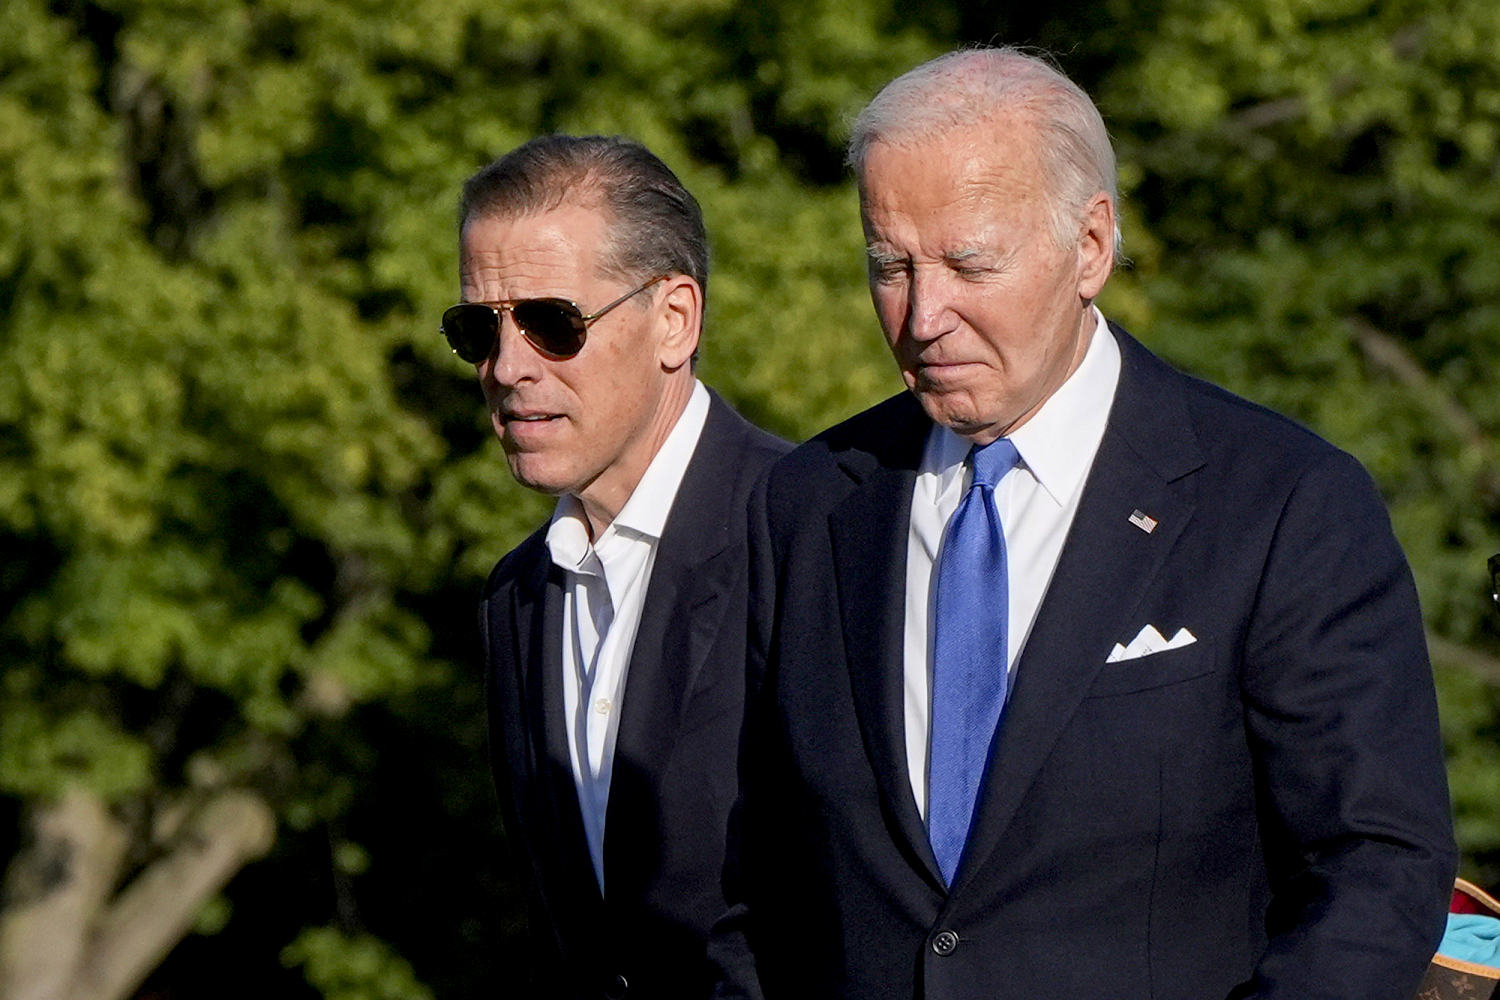 Hunter Biden joins White House meetings as he stays close to the president post-debate